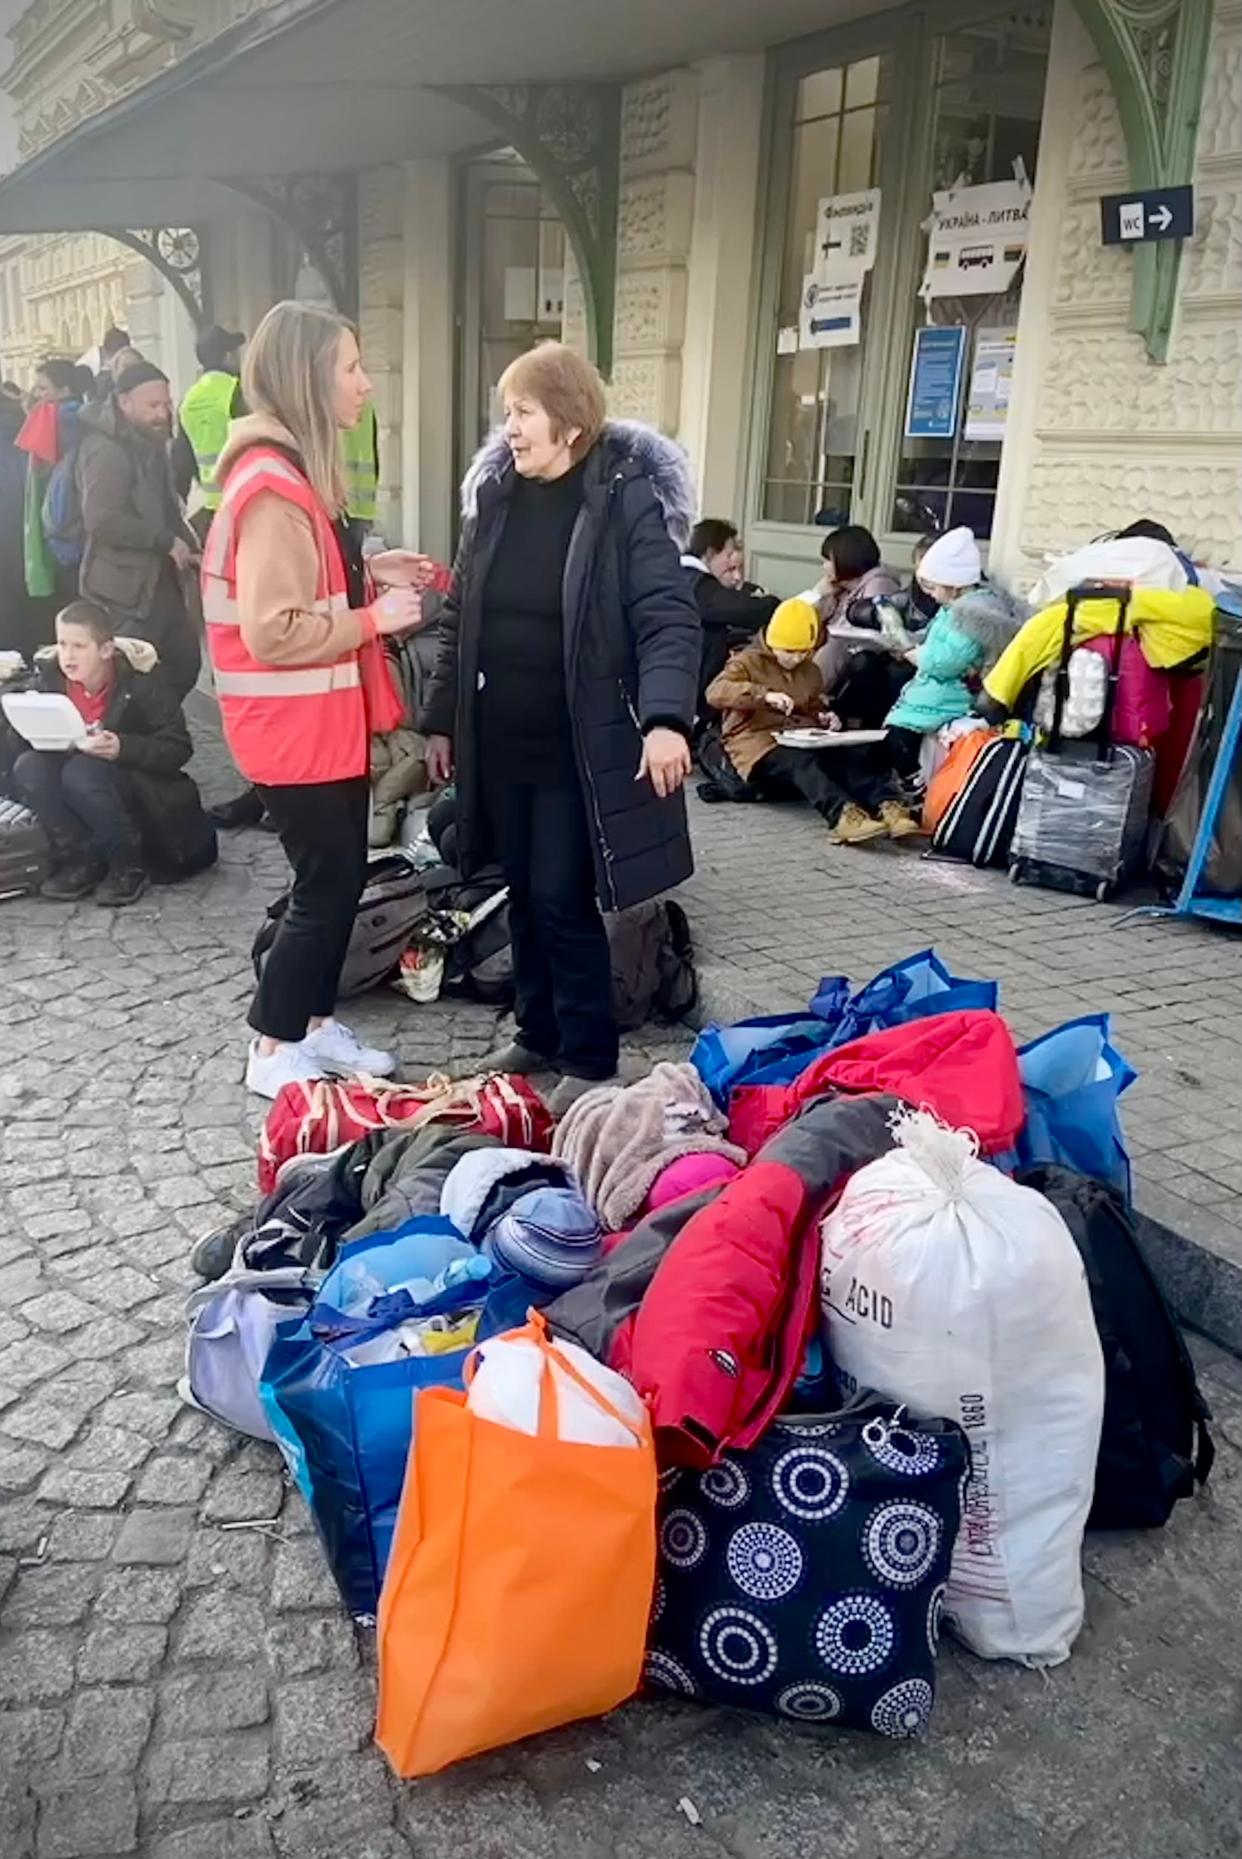 Olga Moroz (left), a city of Jacksonville accountant who was born in Ukraine, spent her vacation greeting refugees at a train station in Poland. In this photo, she talks to one of the refugees while the woman's twin 3-year-old grandchildren sleep on all the possessions they have after fleeing Ukraine.